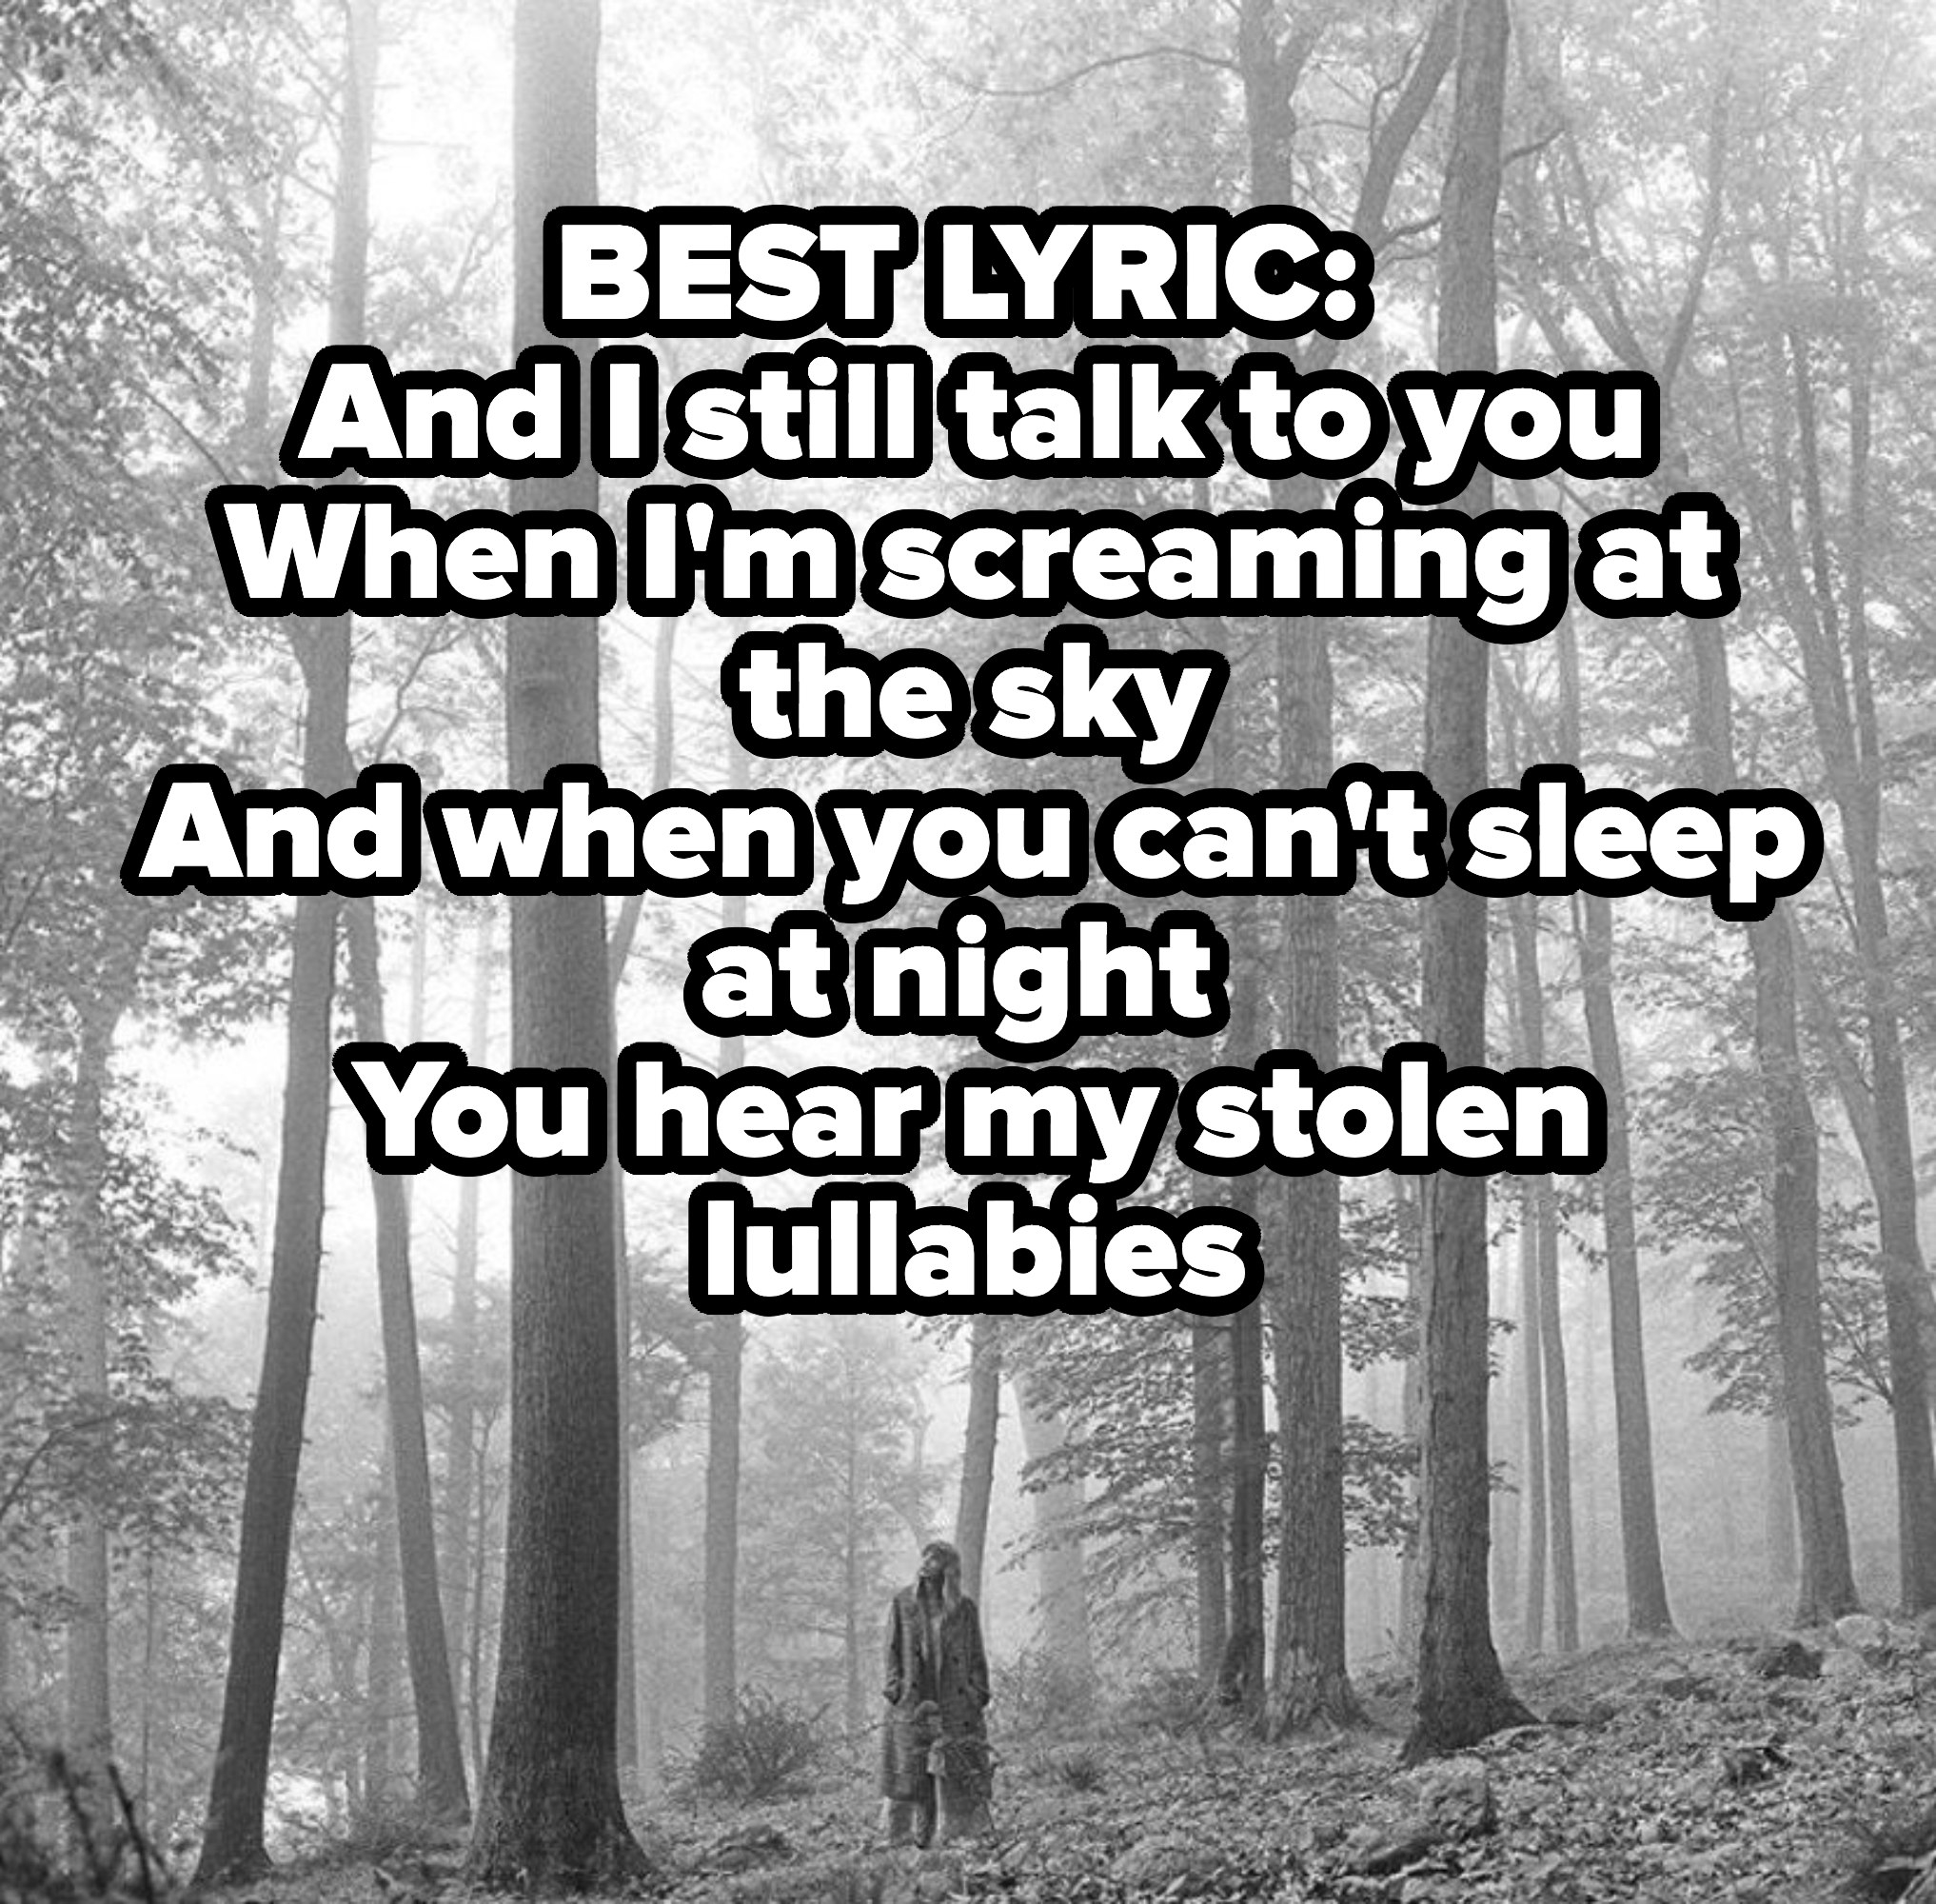 BEST LYRIC: And I still talk to you (When I&#x27;m screaming at the sky)
And when you can&#x27;t sleep at night (You hear my stolen lullabies)